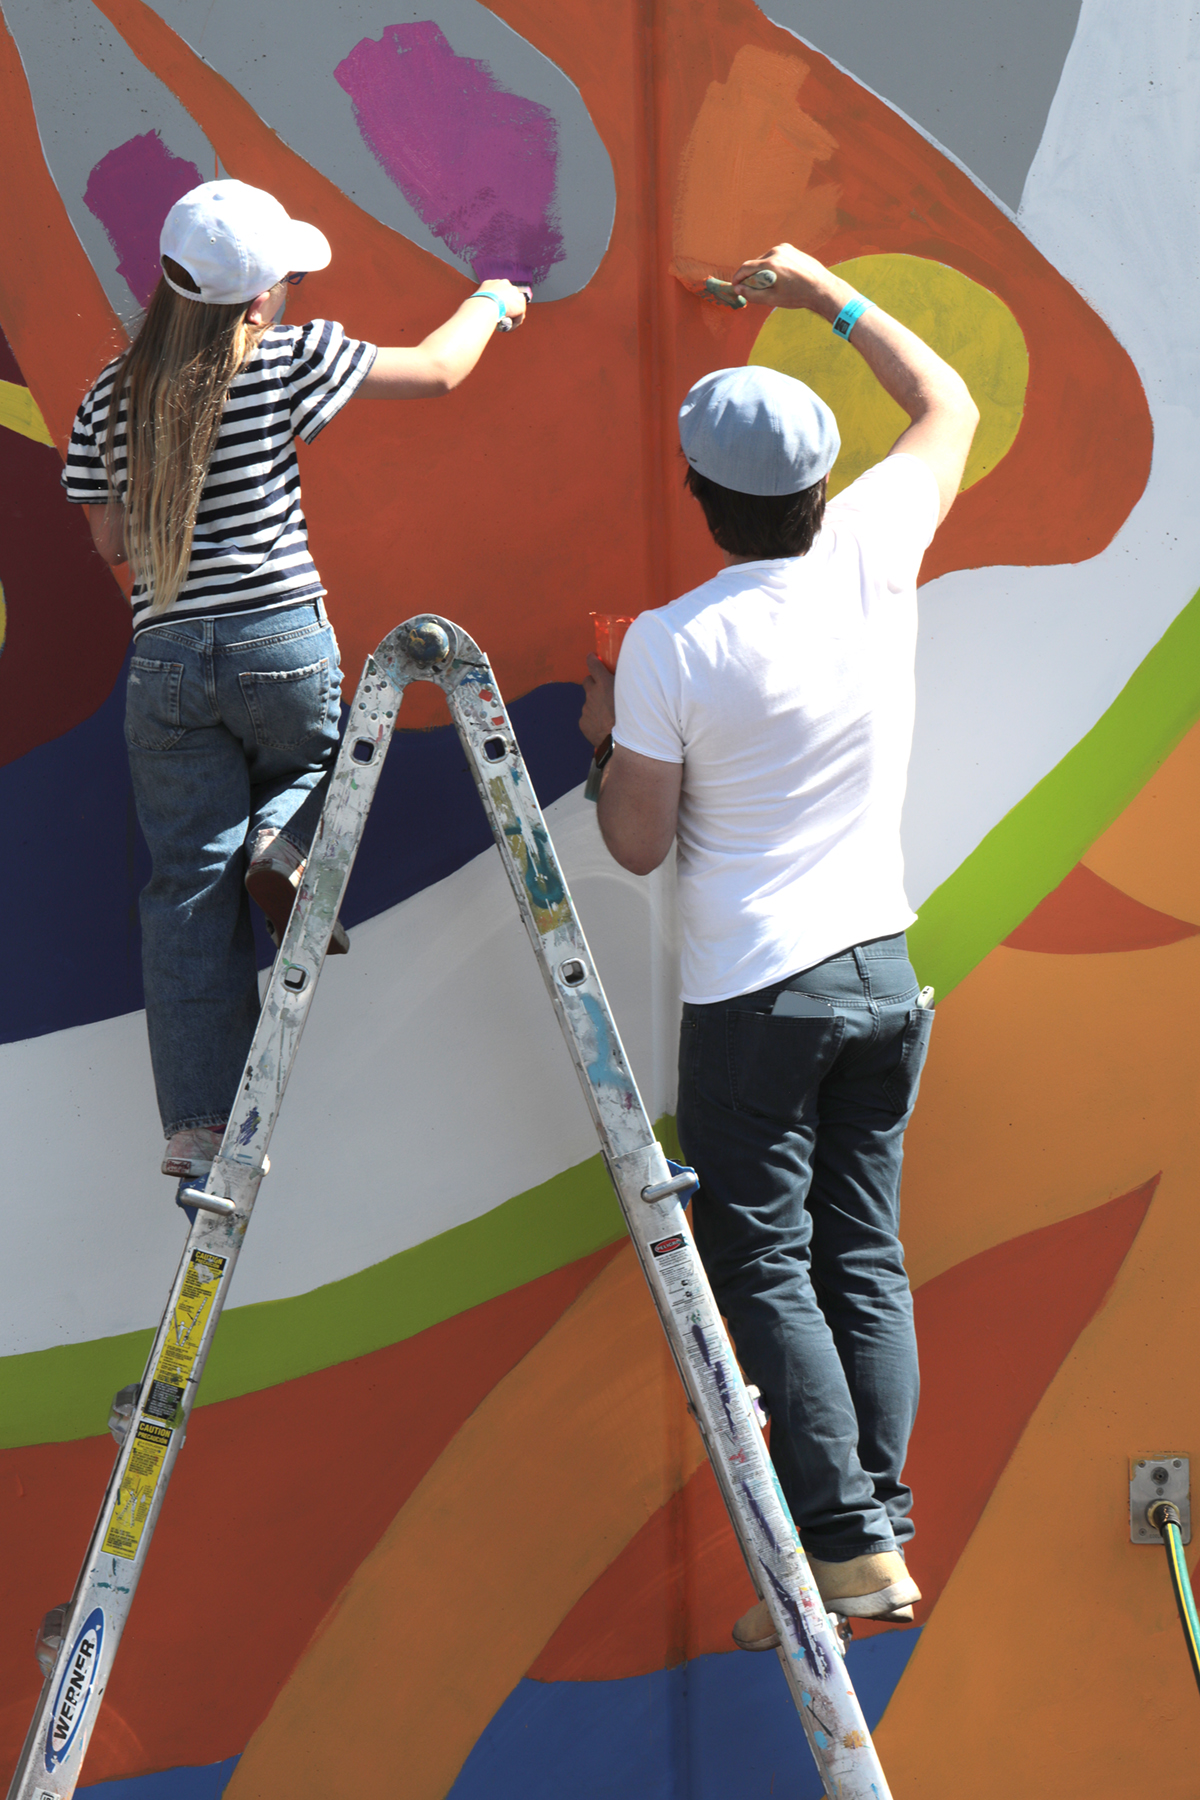 A young child and parent stand on a ladder painting a wall mural.